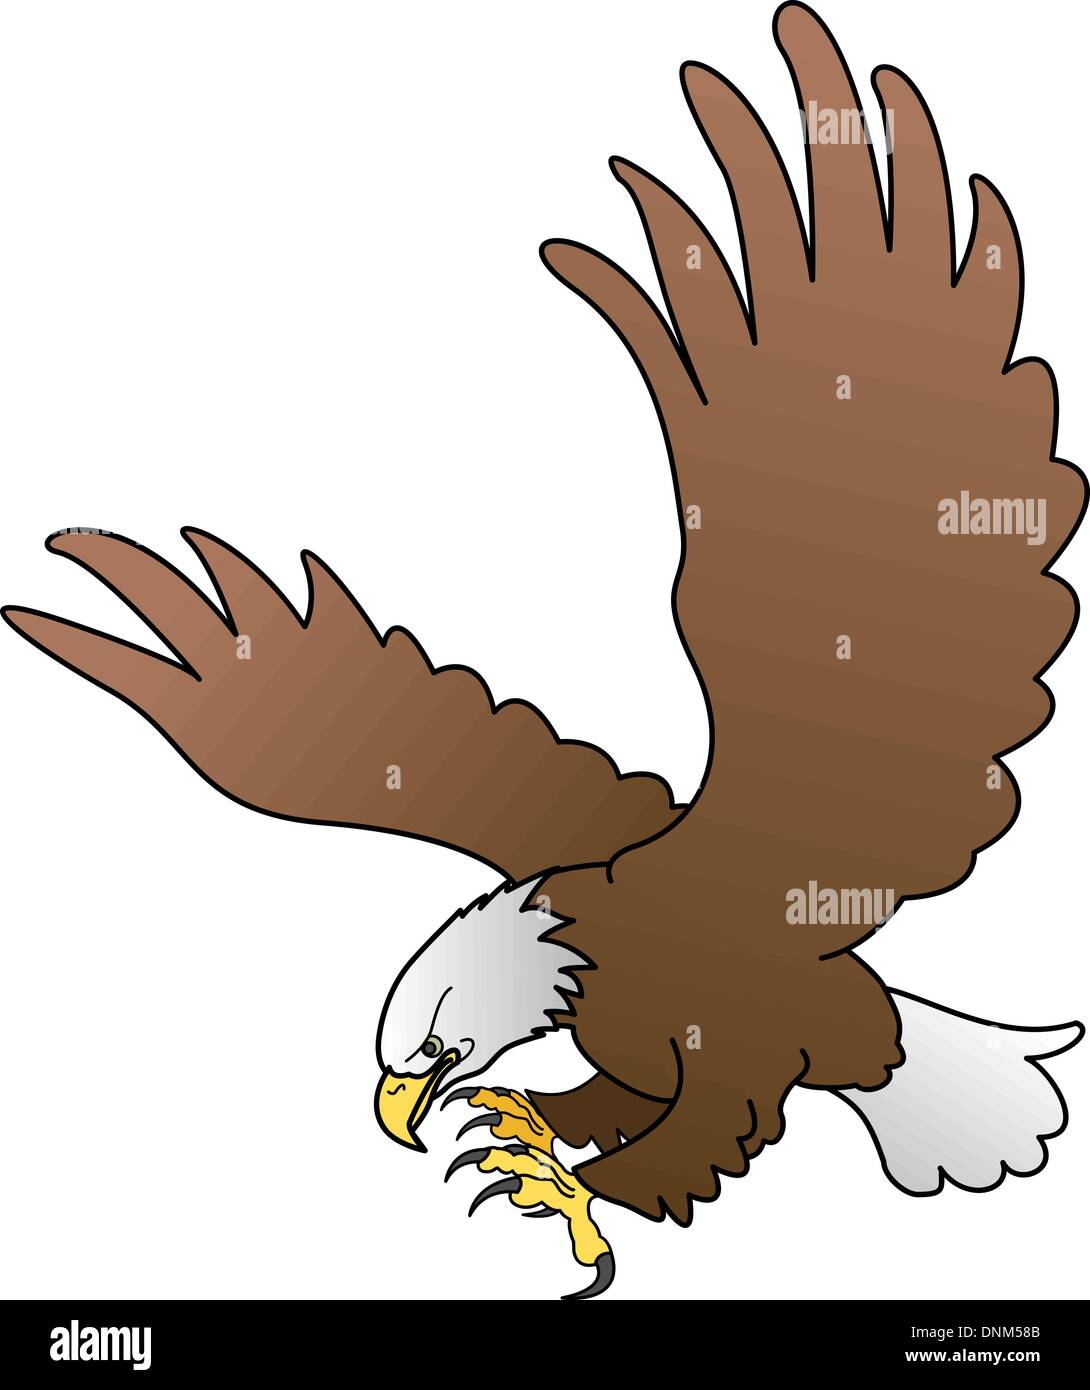 Illustration of bald eagle with spread wings Stock Vector